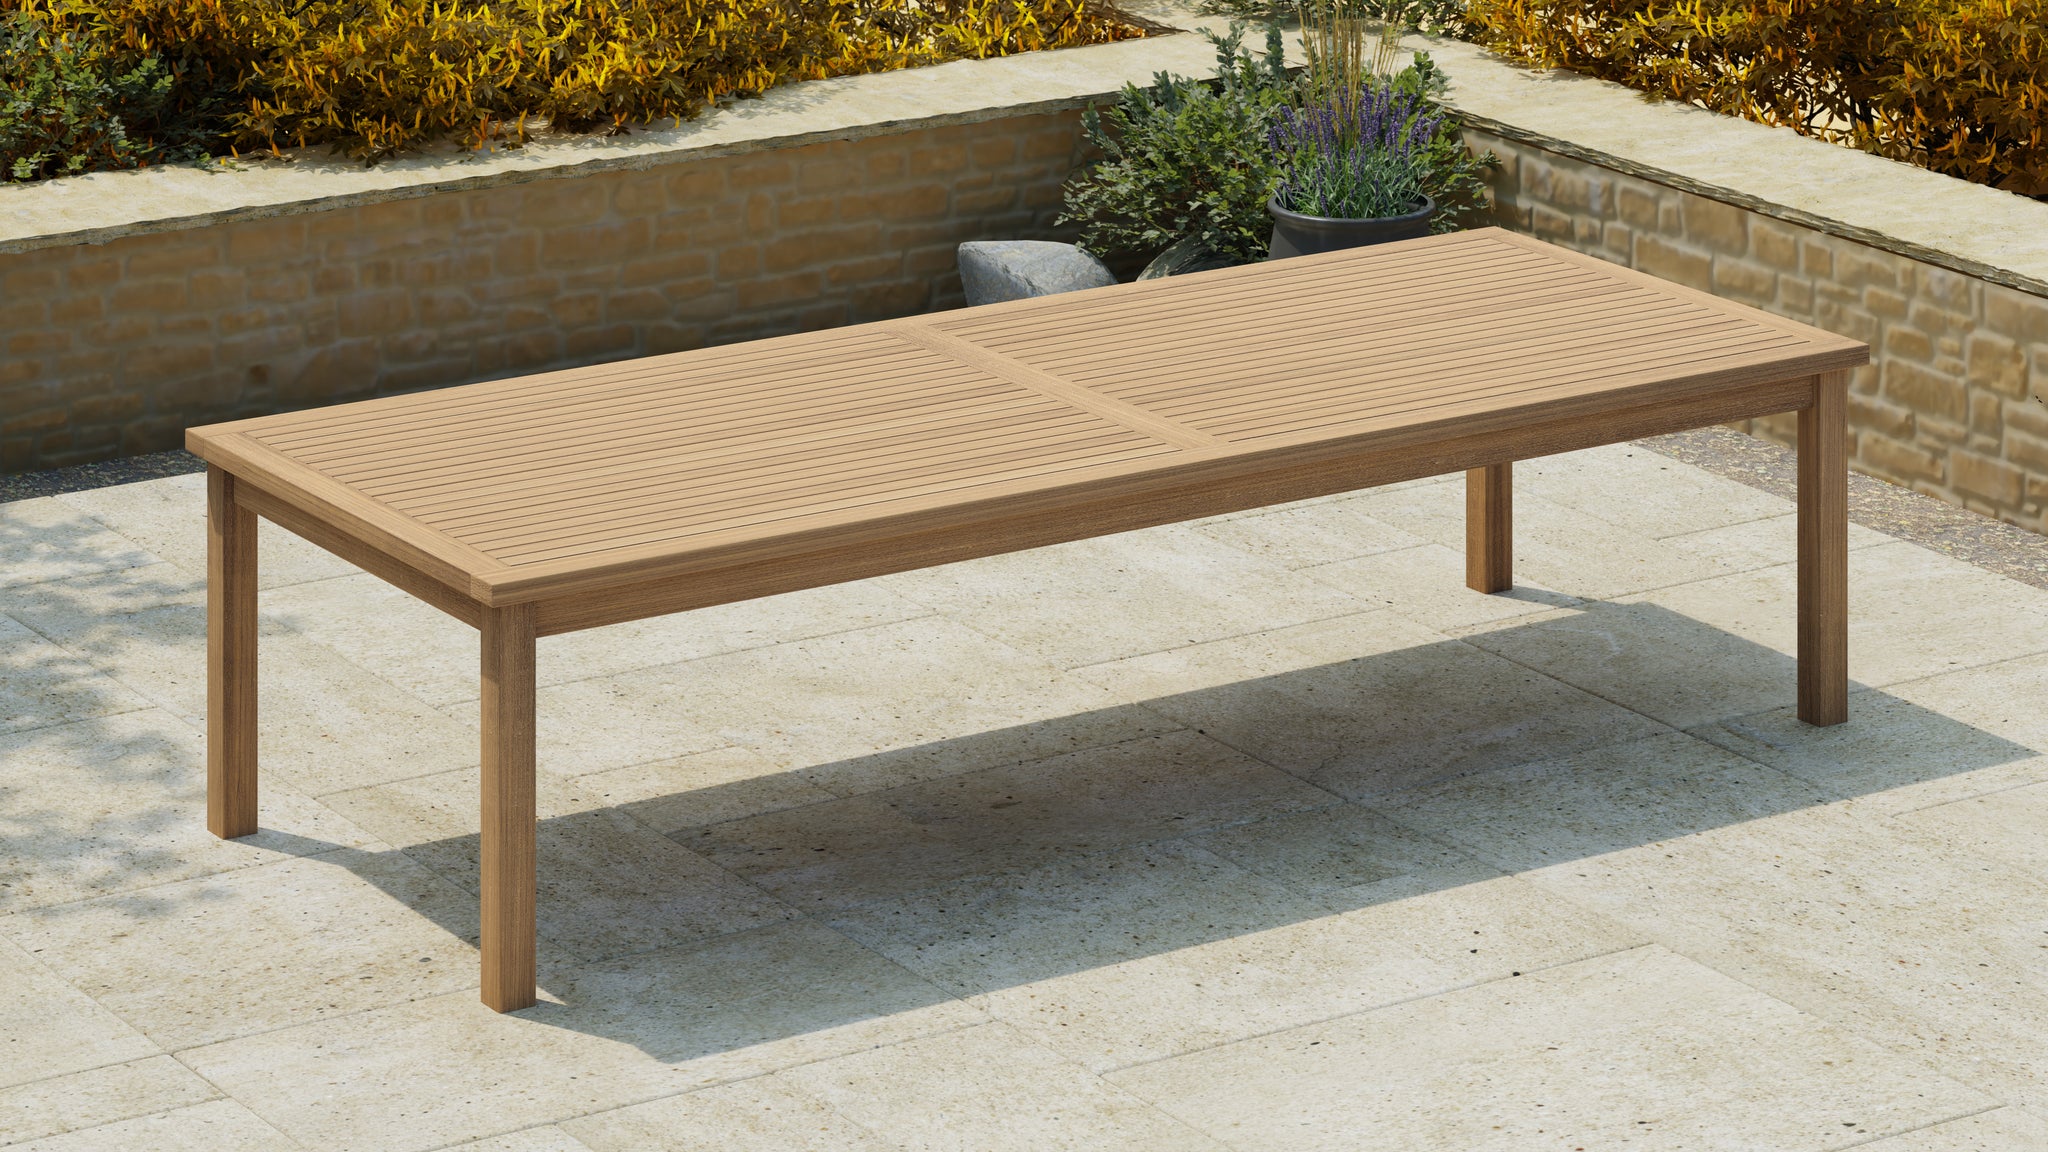 120x300cm Fixed Rectangular Table without Parasol Hole